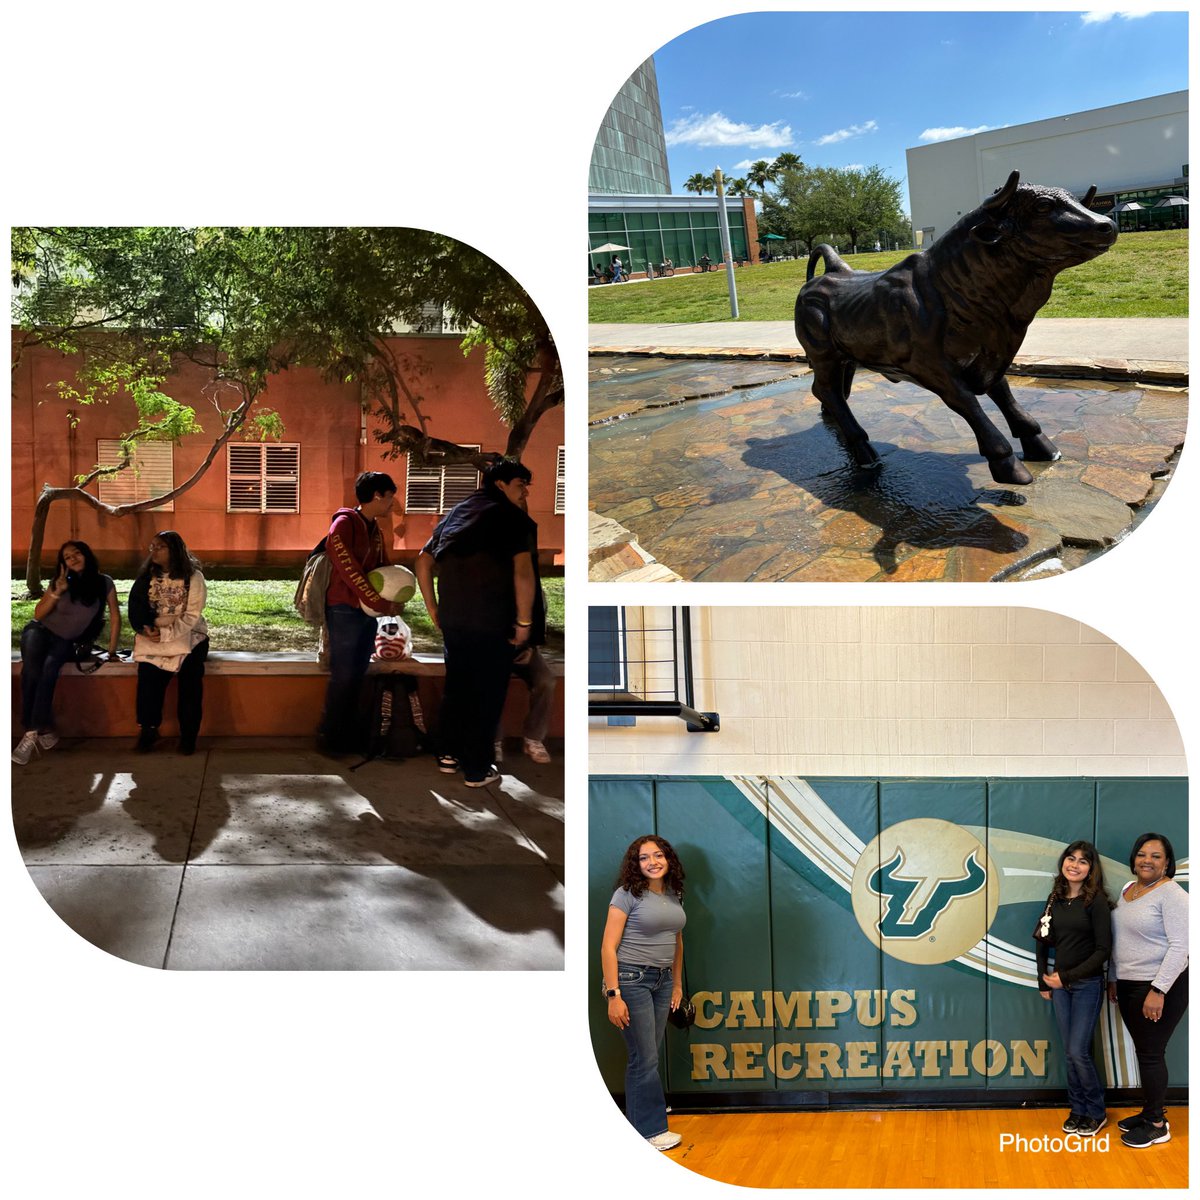 Our Generals went on a college tour of the University of South Florida today! #collegebound @usouthflorida 💚💛